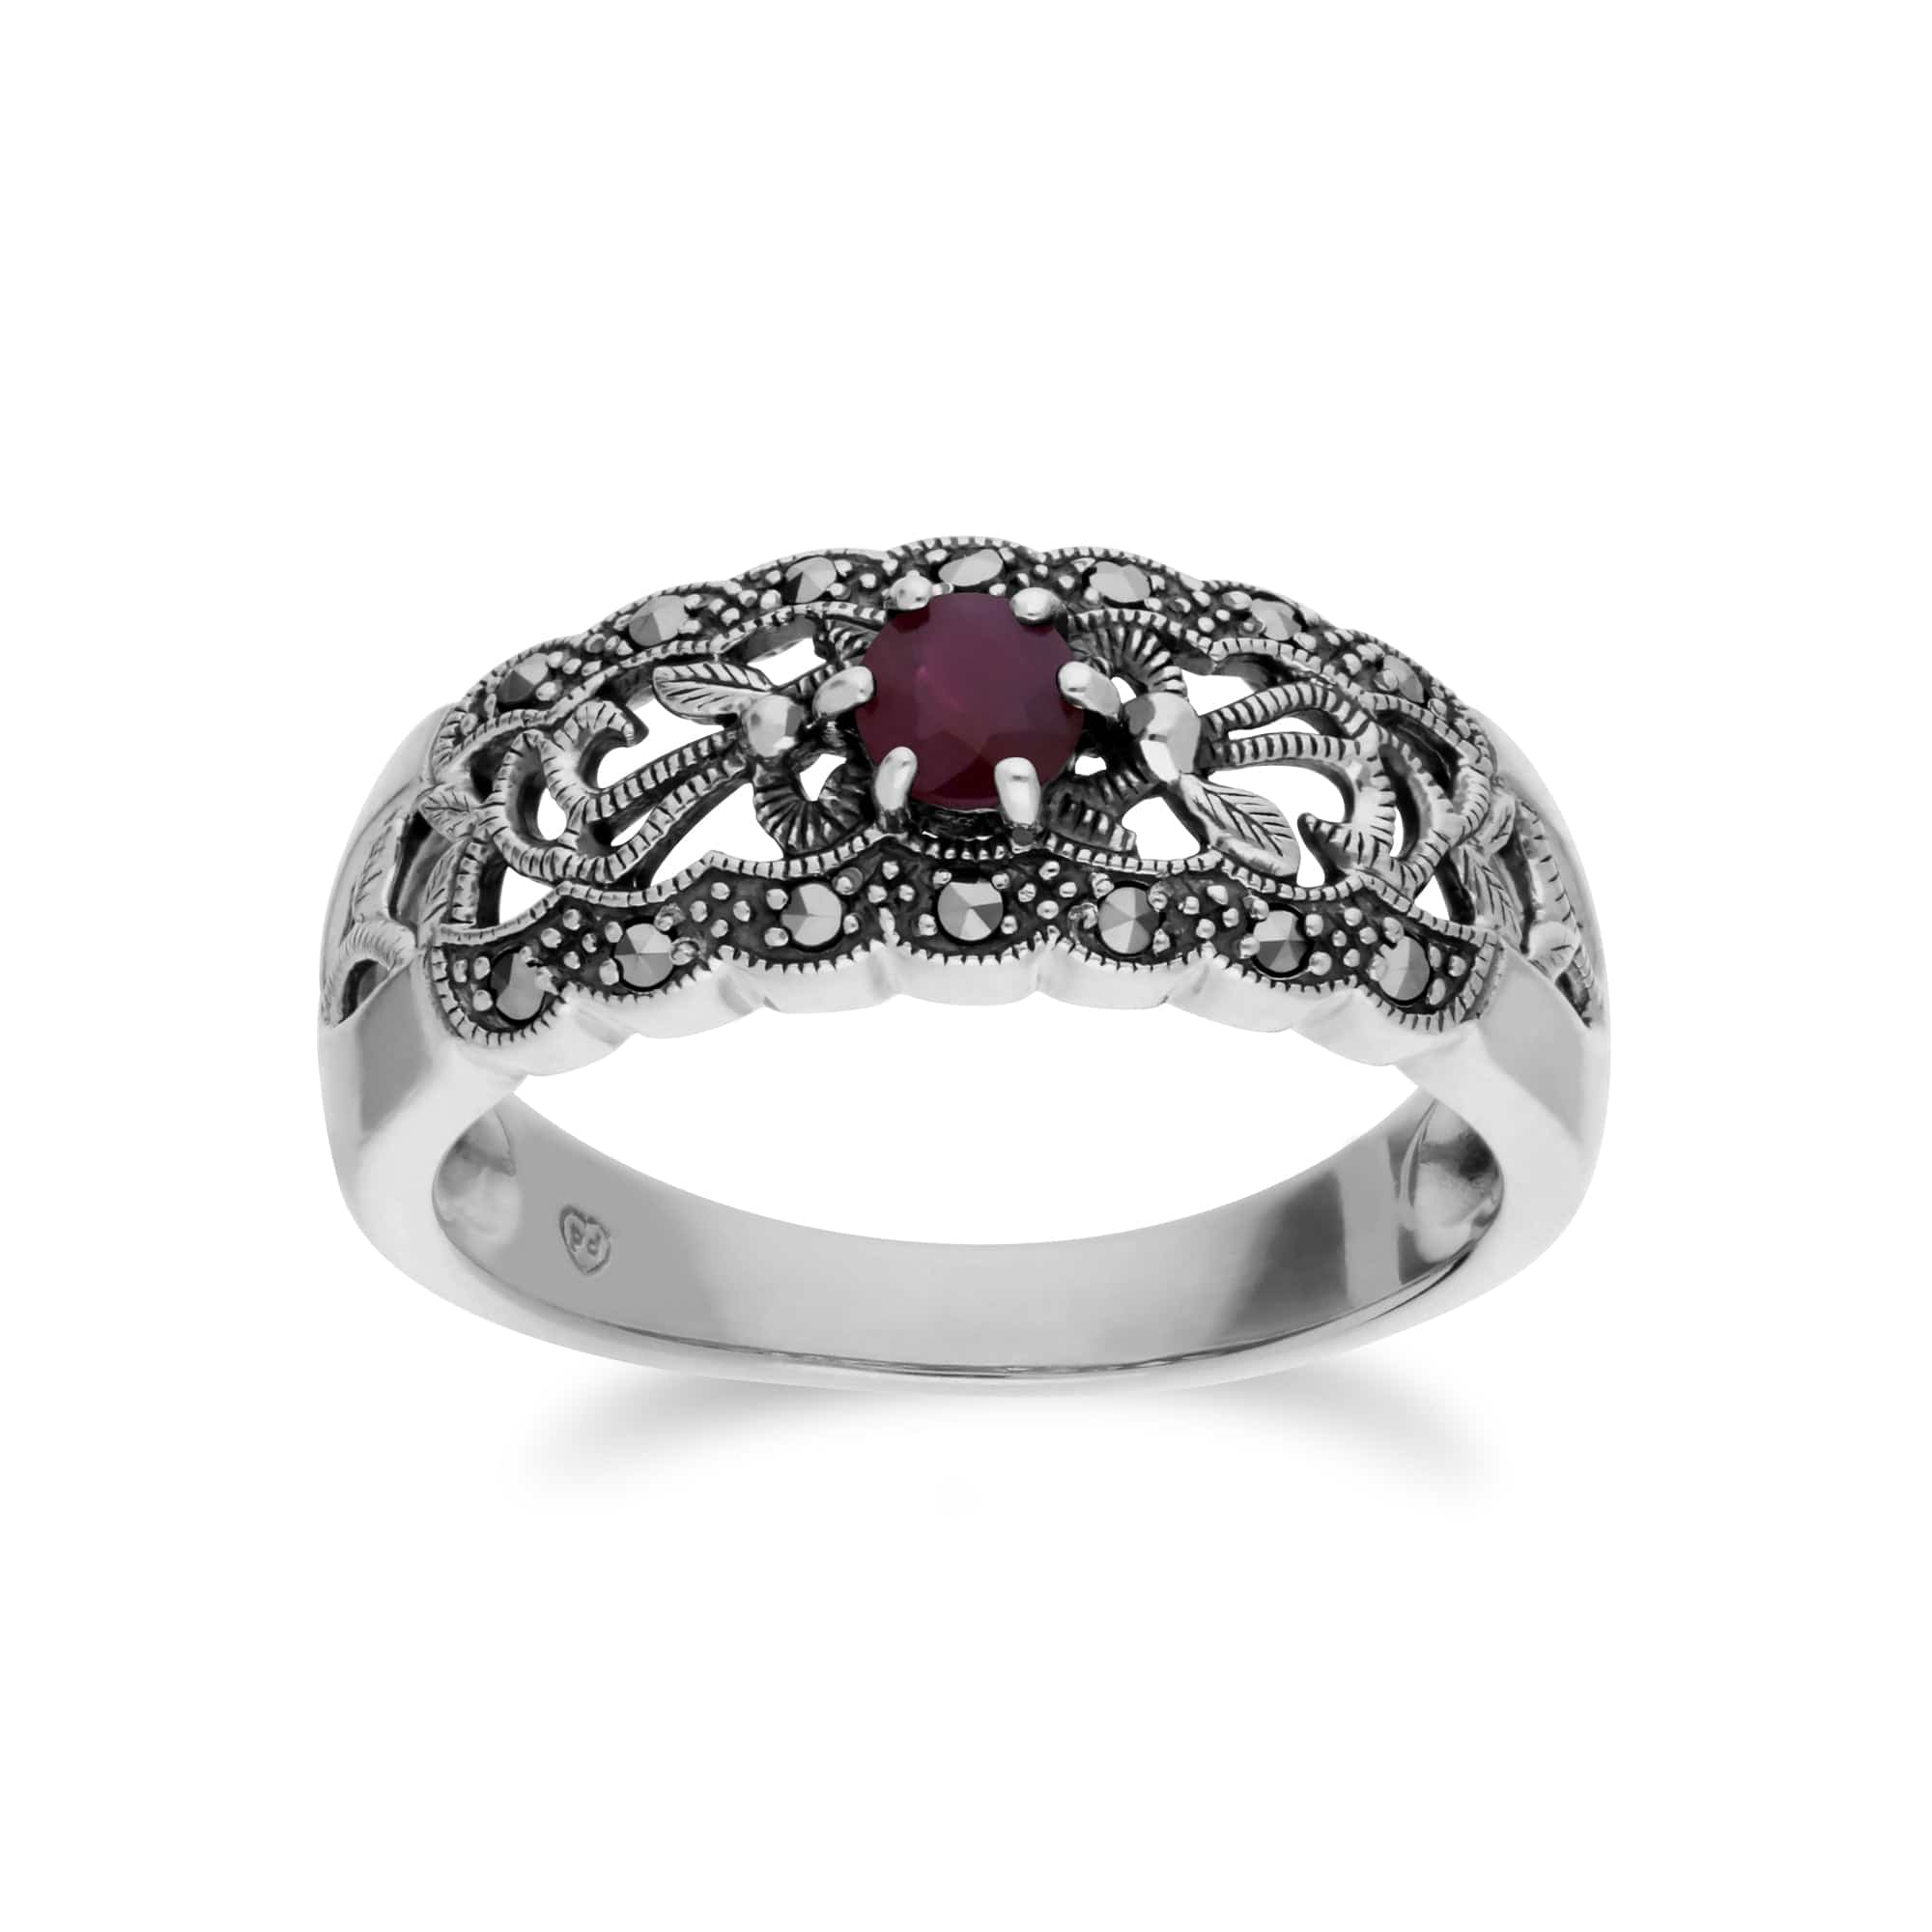 Art Nouveau Style Round Ruby & Marcasite Floral Band Ring in Sterling Silver - Gemondo